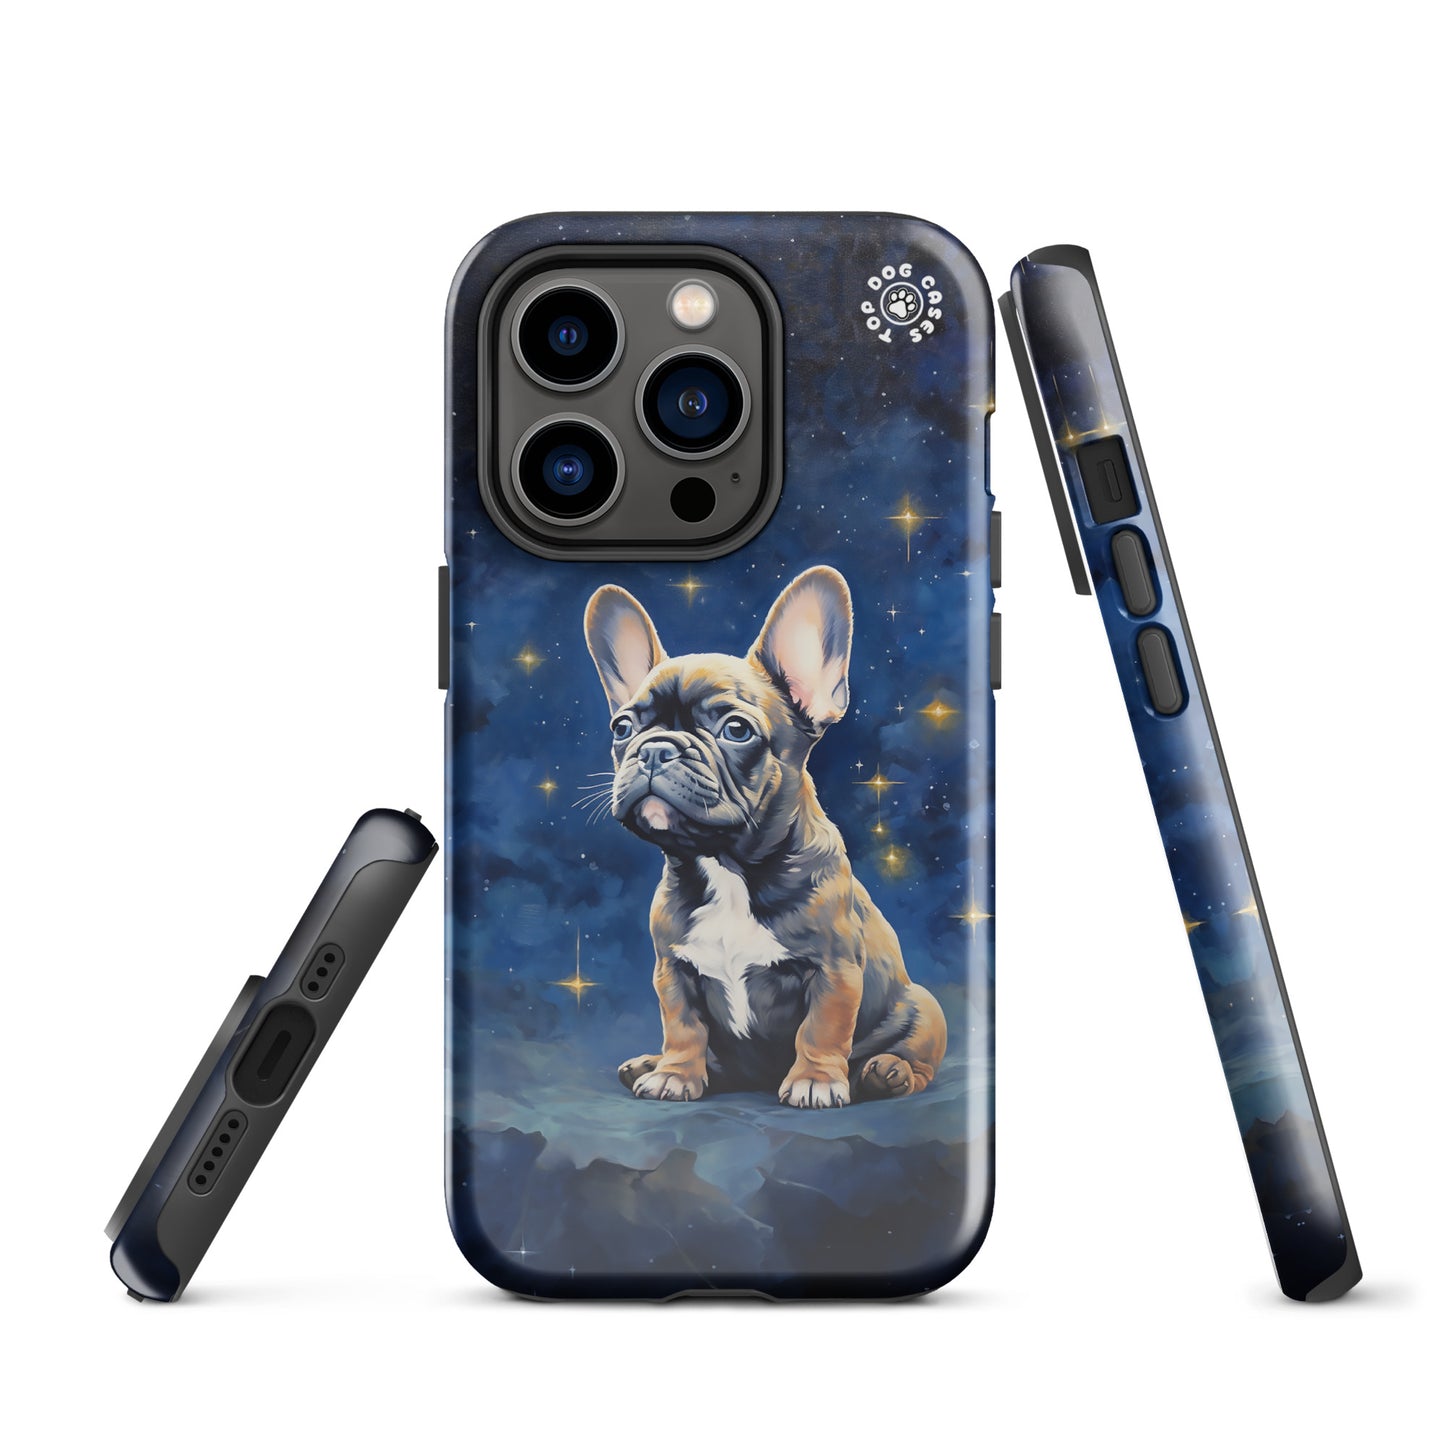 French Bulldog - iPhone 14 Case - Top Dog Cases - #CuteDog, #CuteDogs, #DogPhoneCase, #dogs, #French Bulldog, #FrenchBulldog, #iPhone, #iPhone14, #iPhone14case, #iPhone14DogCase, #iPhone14Plus, #iPhone14Pluscase, #iPhone14Pro, #iPhone14ProMax, #iPhone14ProMaxCase, #iphonedogcase